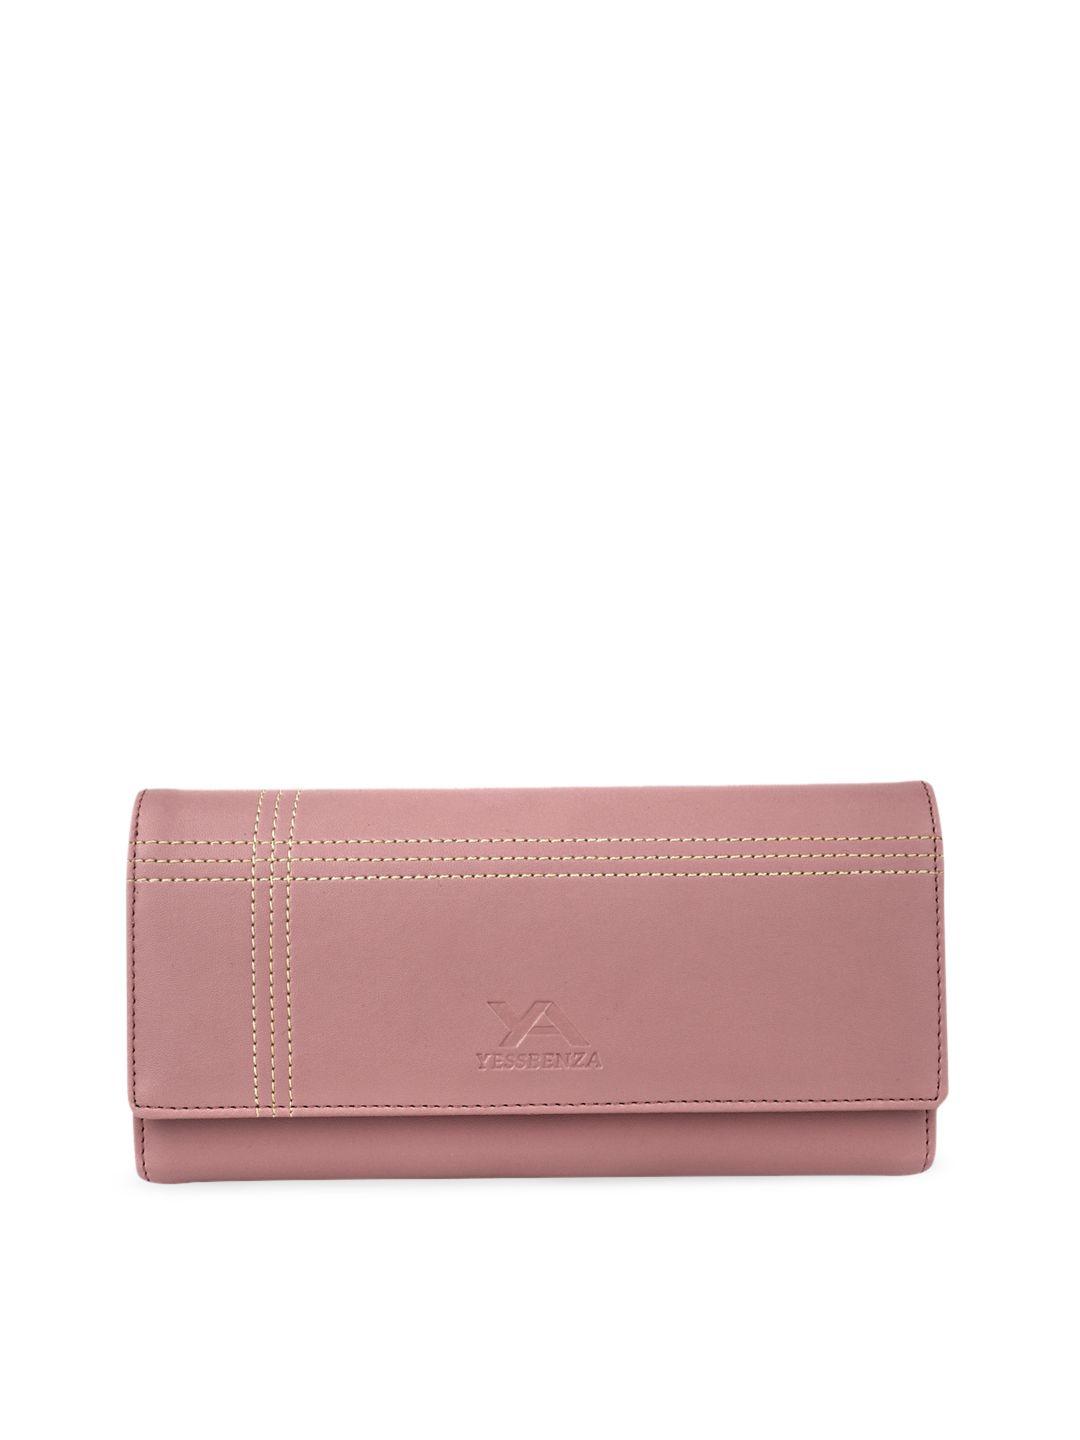 yessbenza rose solid envelope clutch